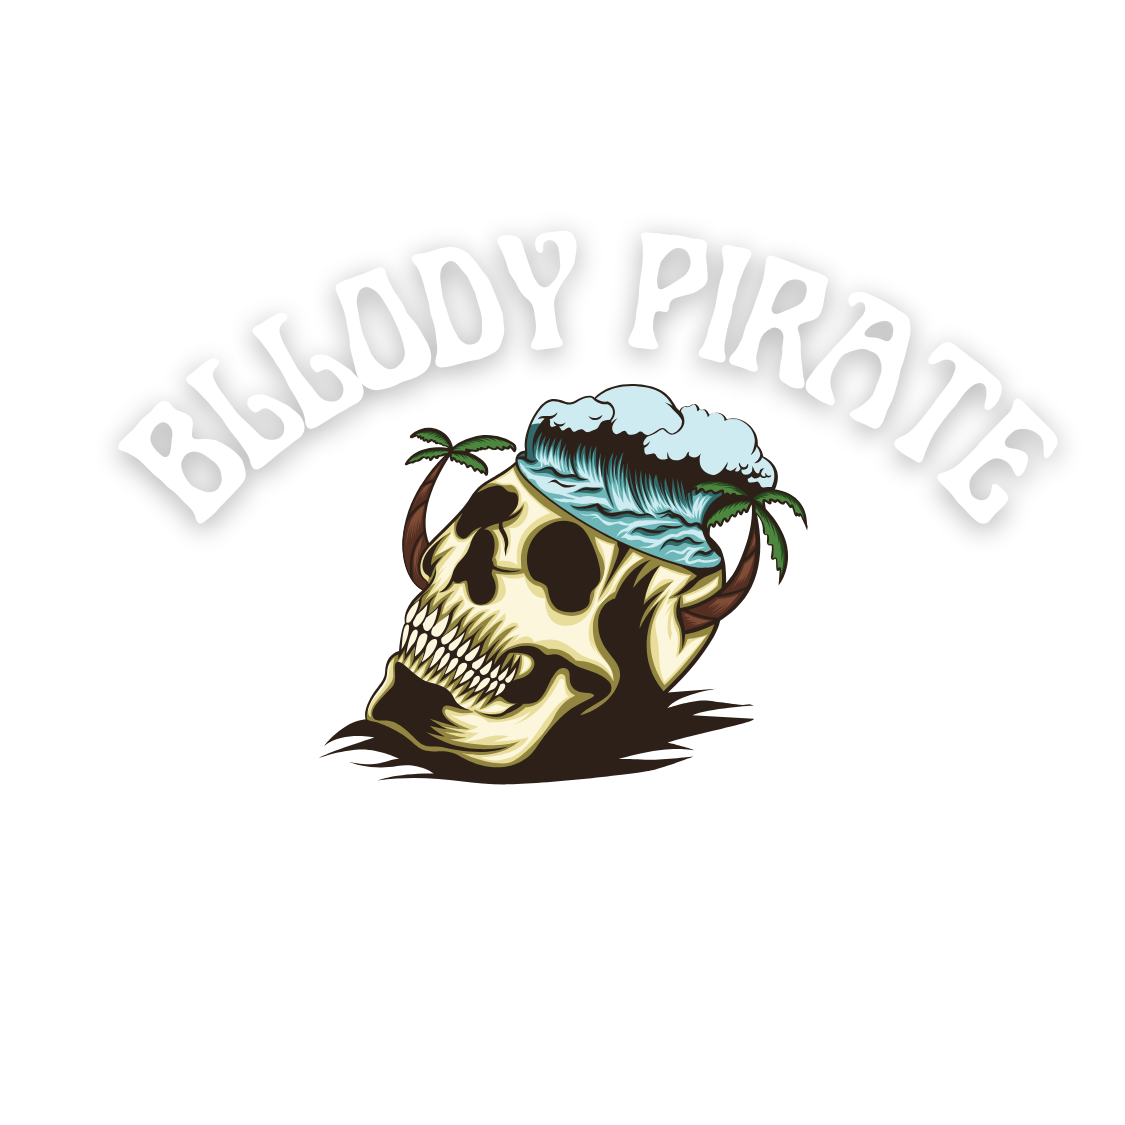 Bloody Pirate Coffee Company